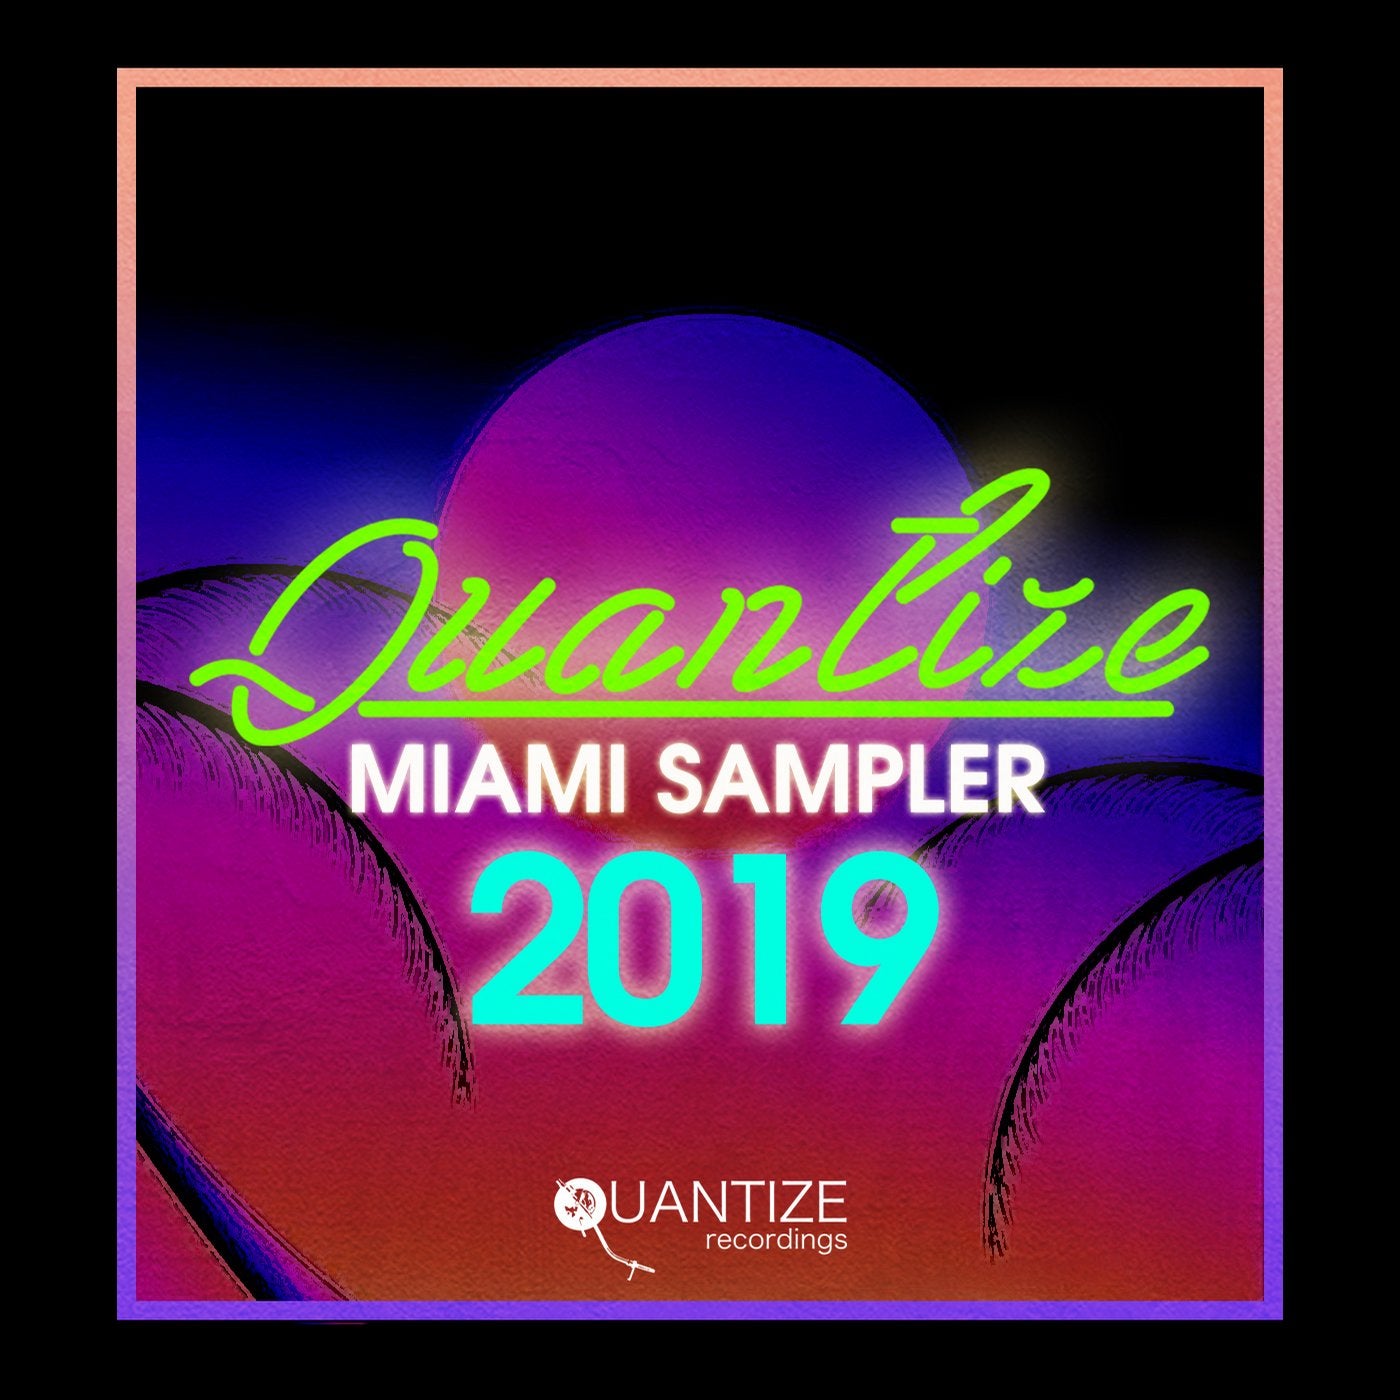 Quantize Miami Sampler 2019 - Compiled And Mixed By DJ Spen